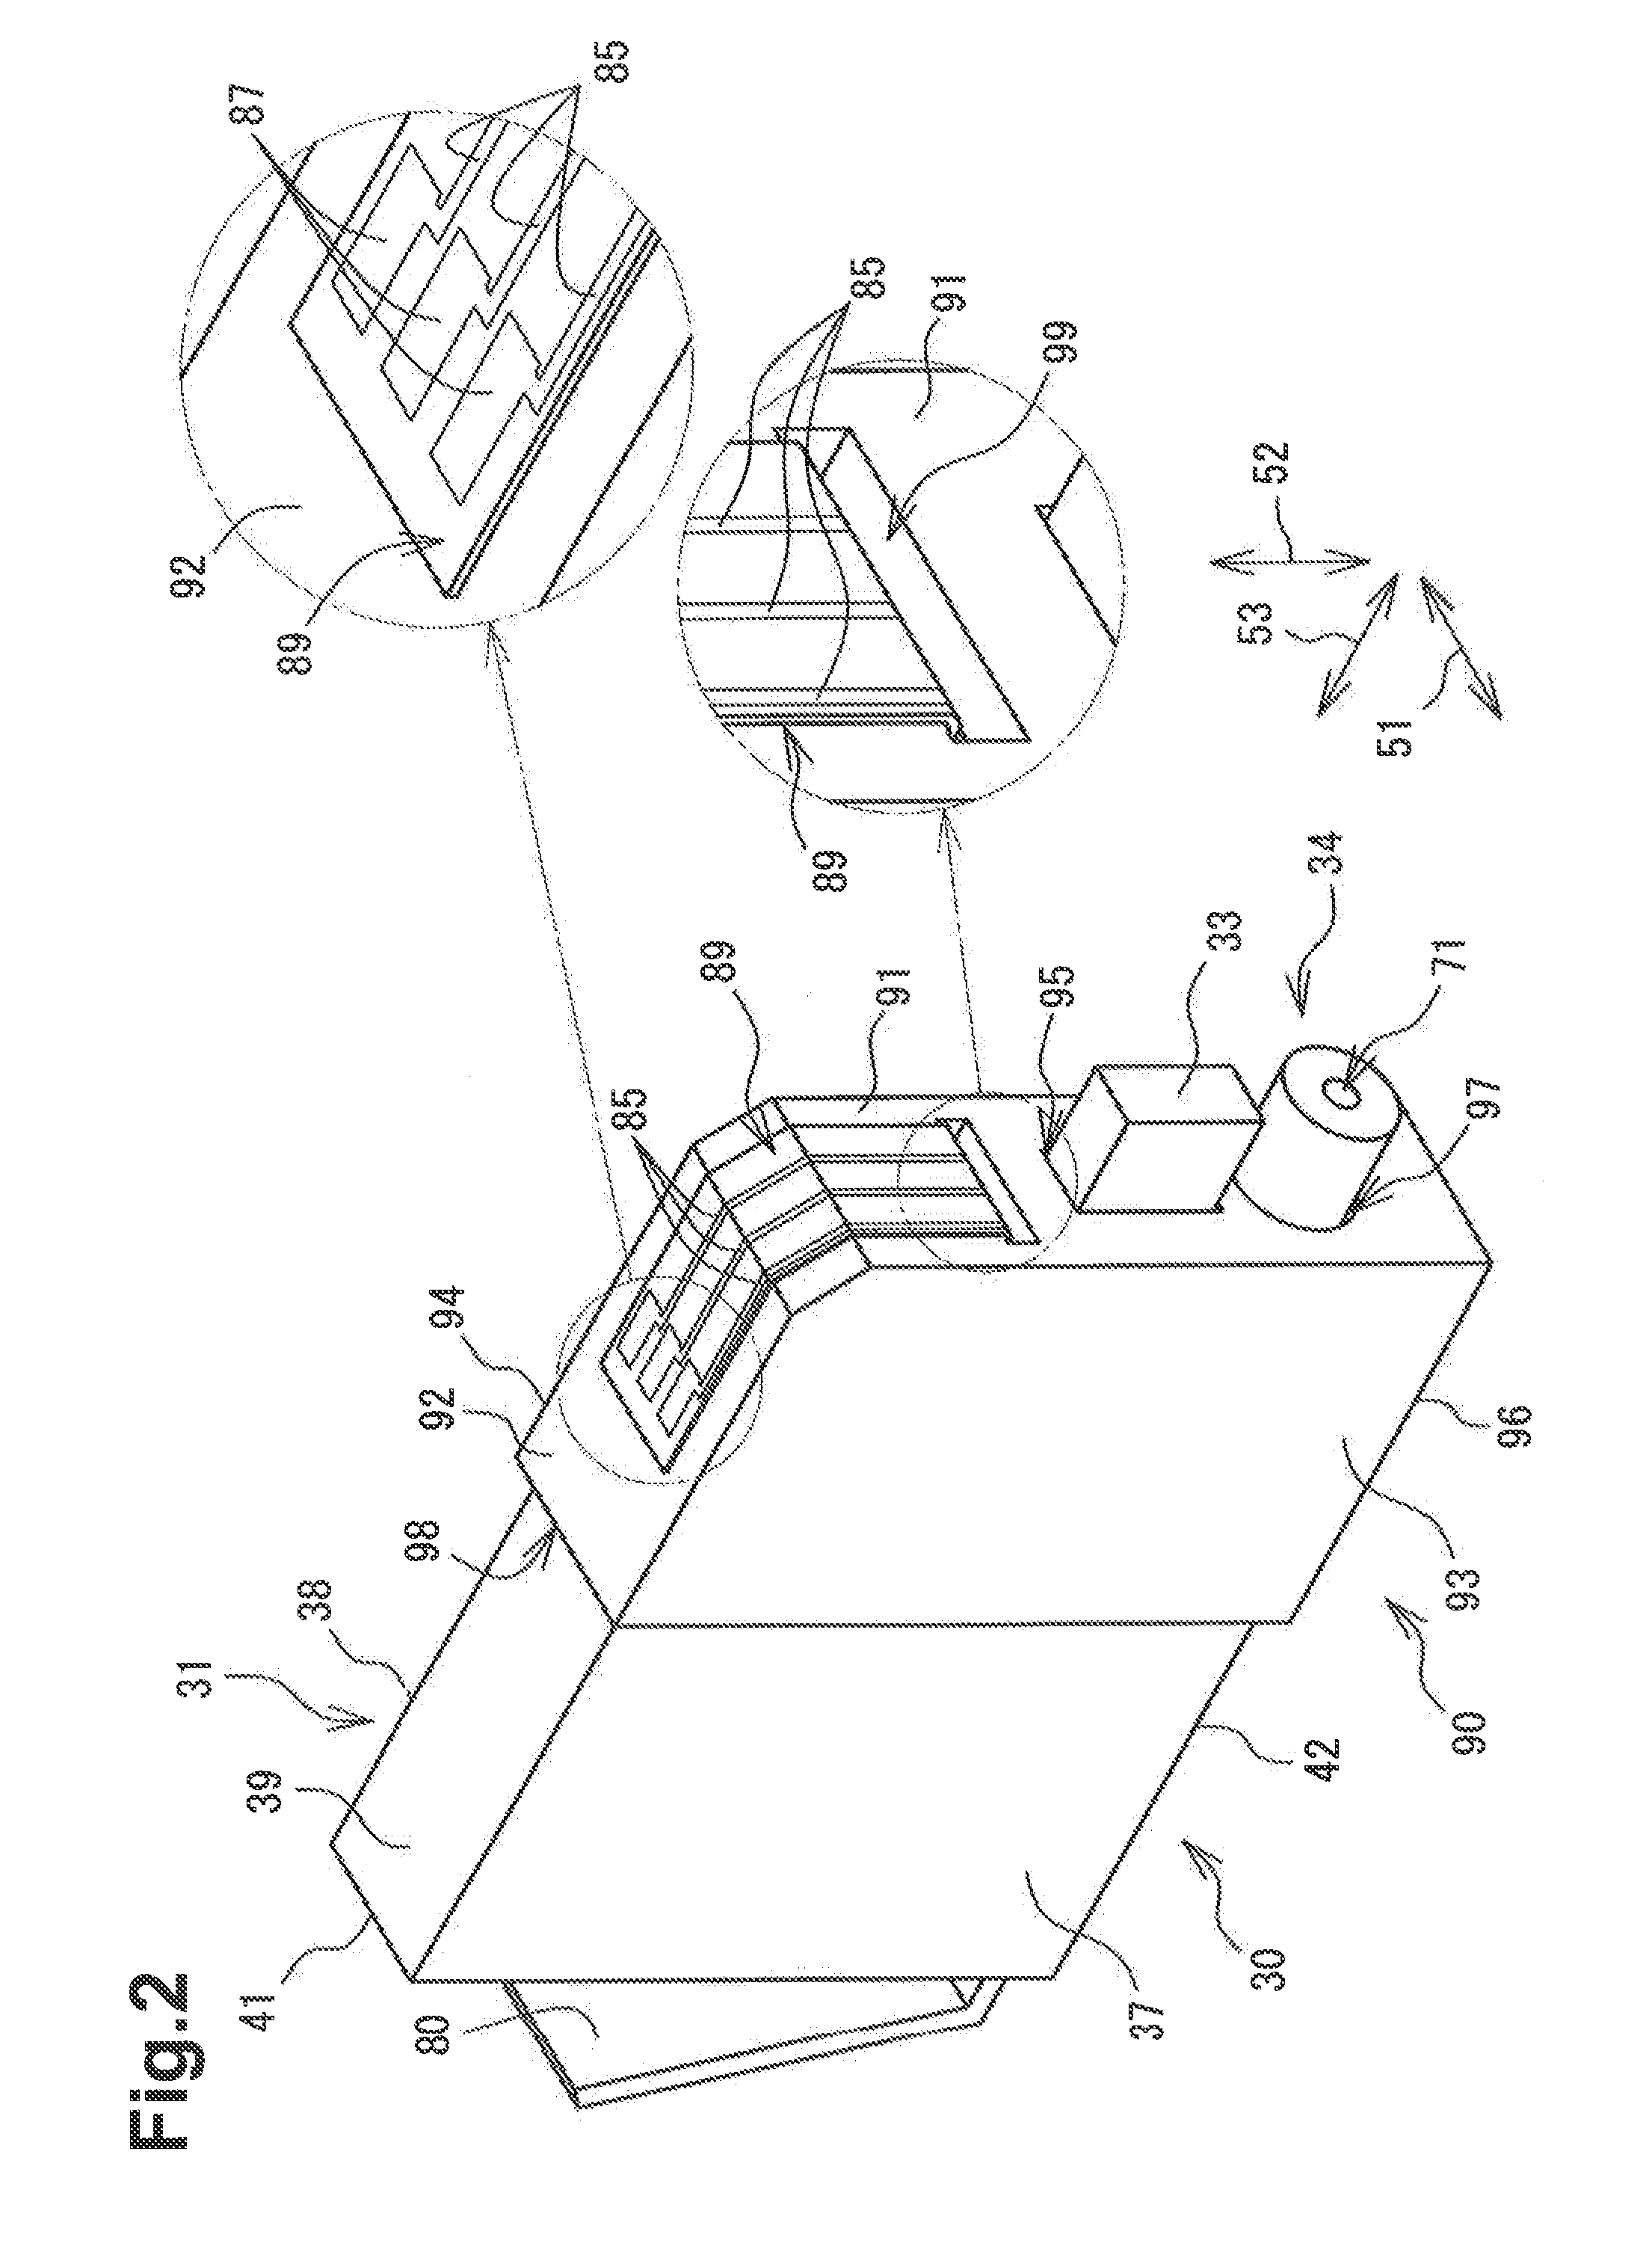 Ink containing device